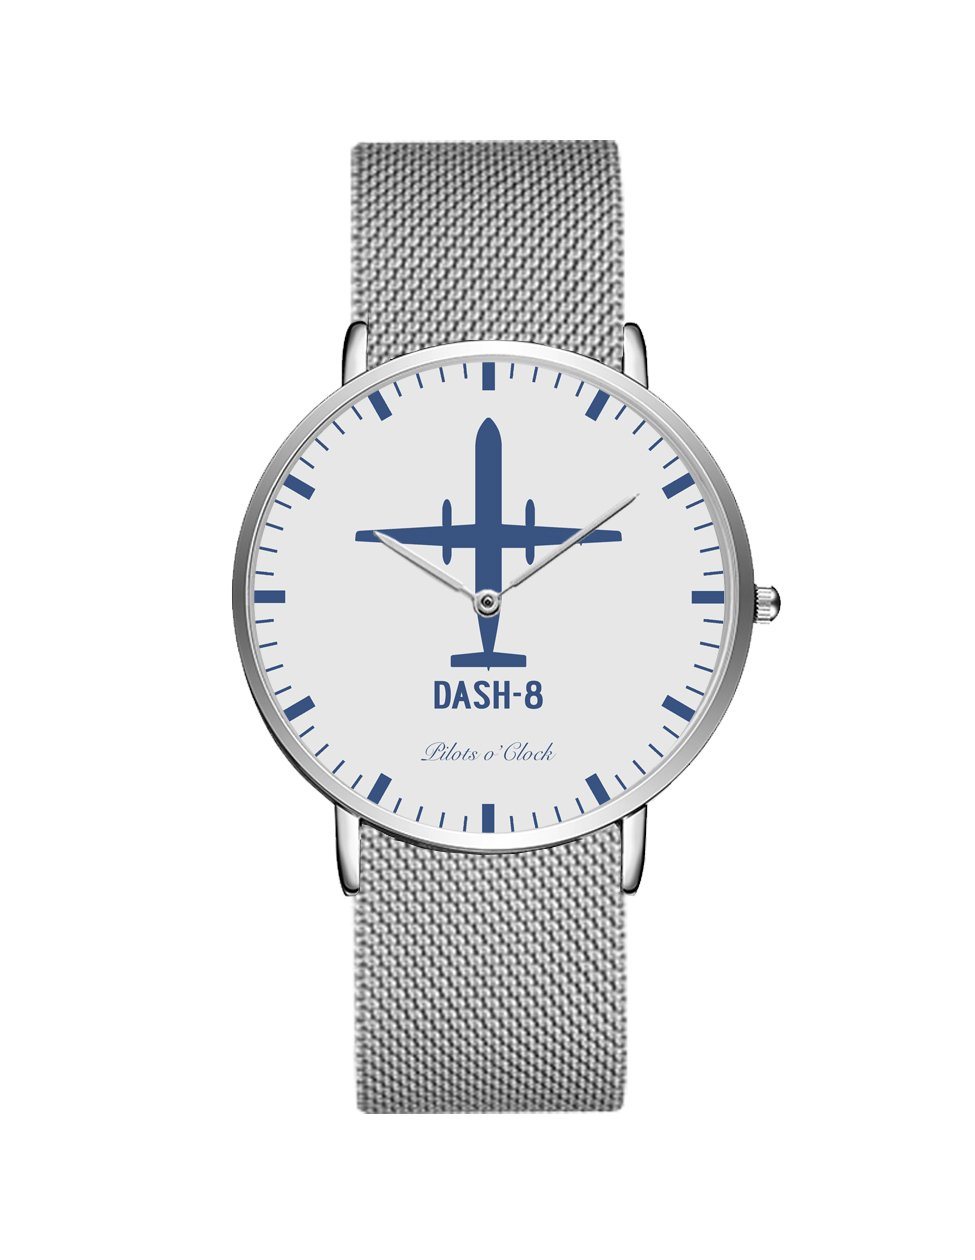 Bombardier Dash-8 Stainless Steel Strap Watches Pilot Eyes Store Silver & Silver Stainless Steel Strap 